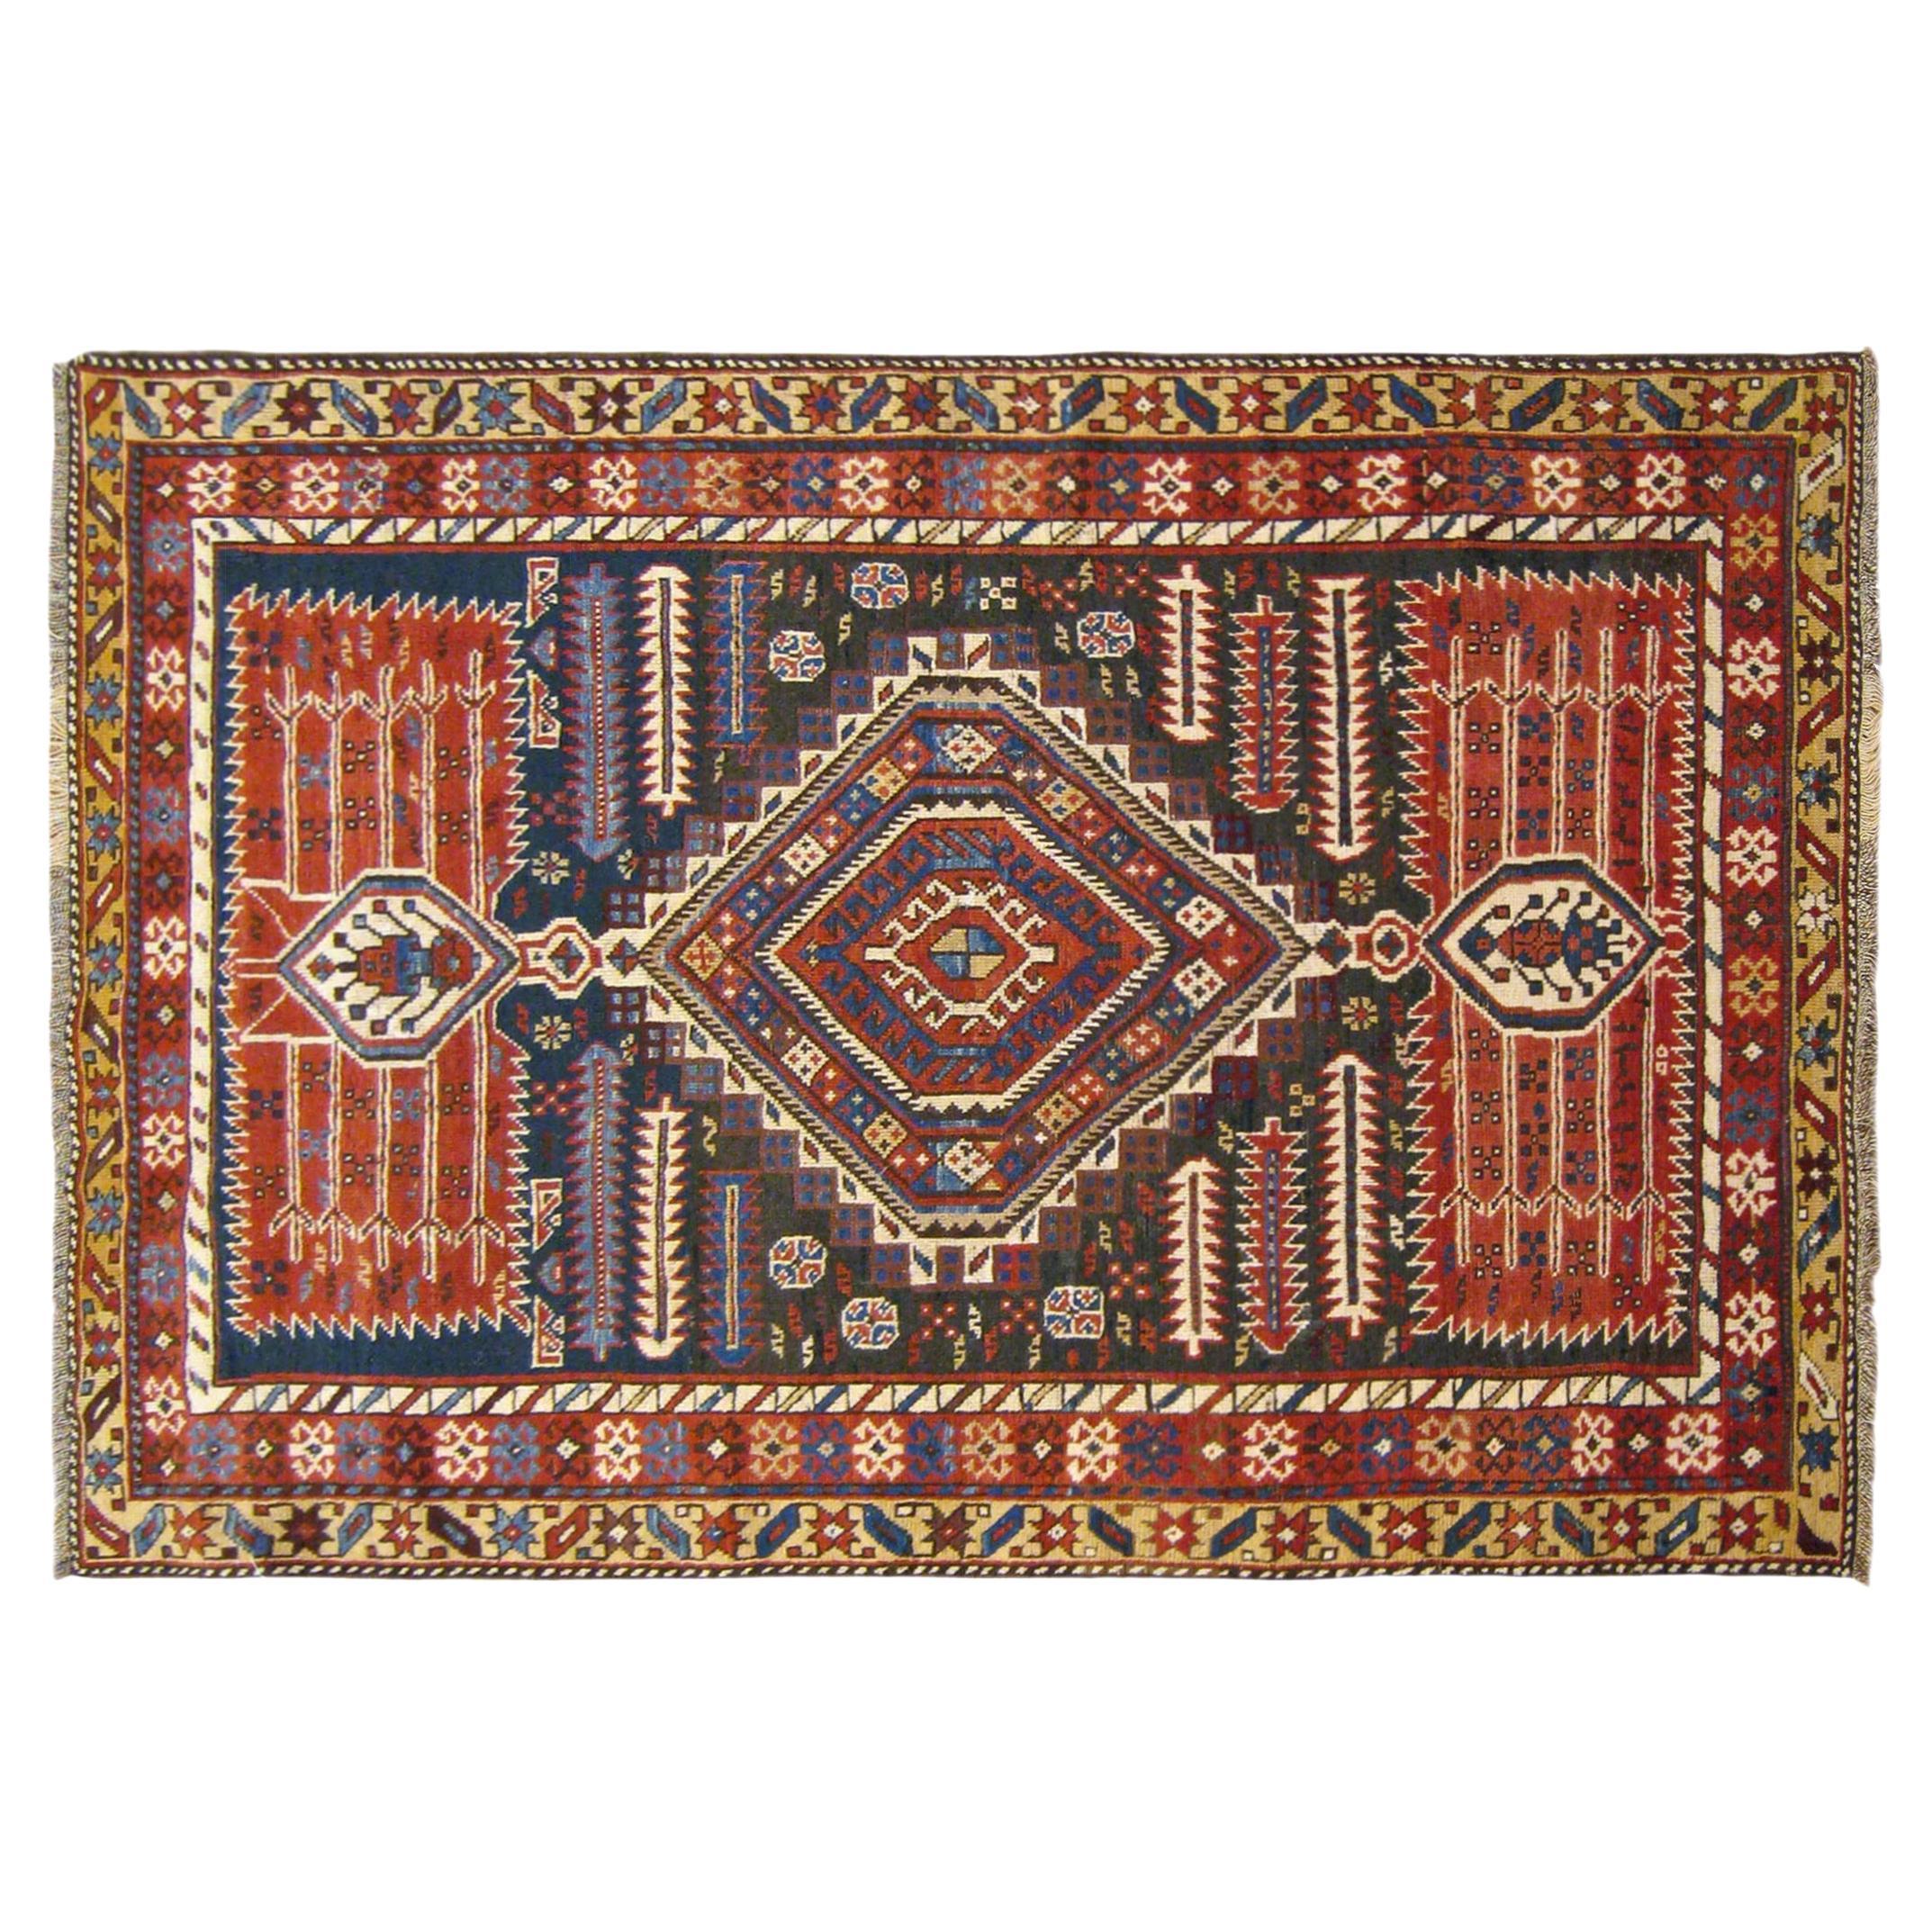 Antique Caucasian Shirvan Oriental Rug in Small Size with Central Medallion